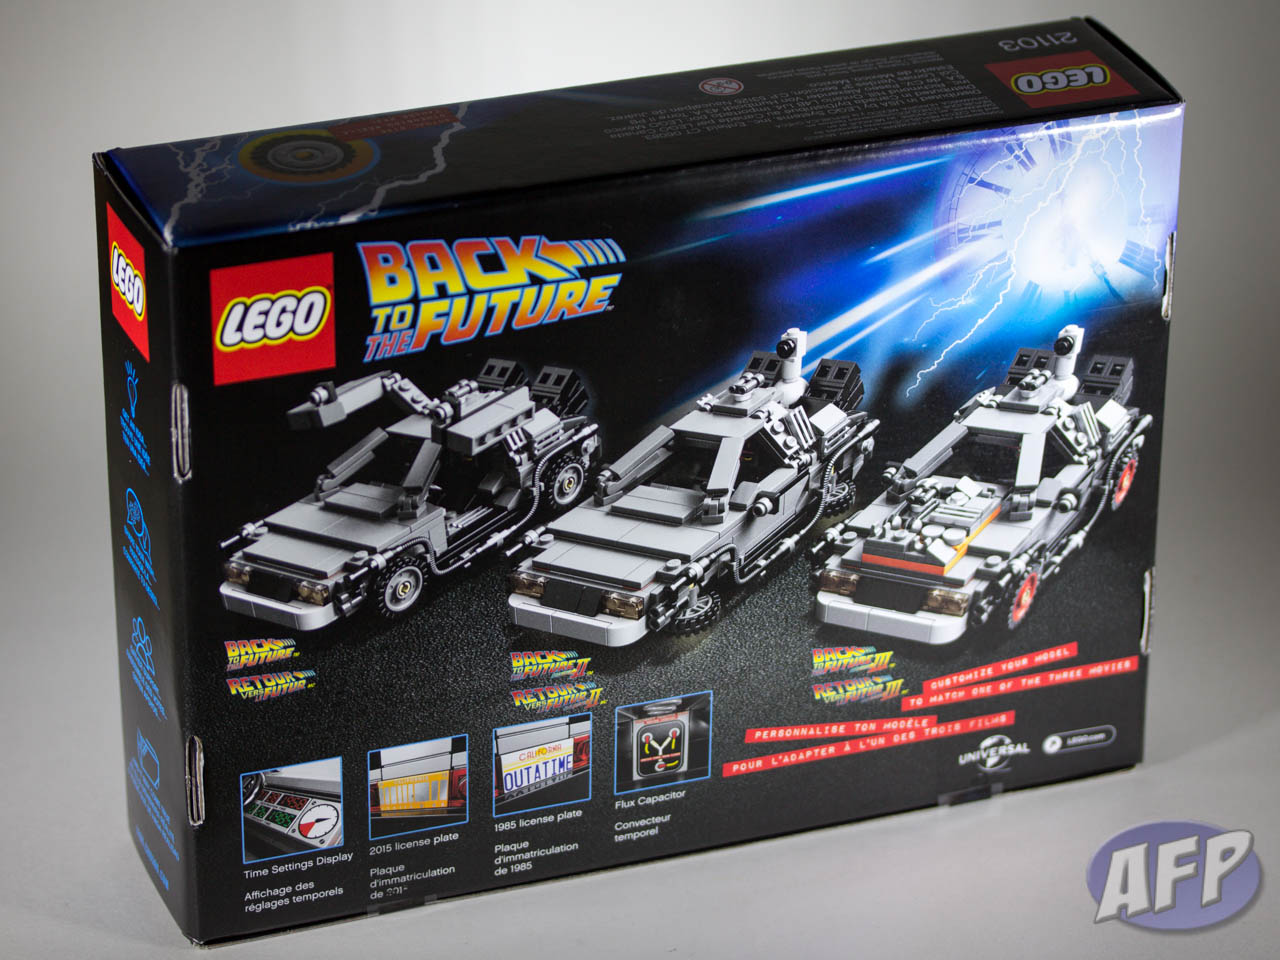 Back To the Future's DeLorean Revealed In Incredible New LEGO Set